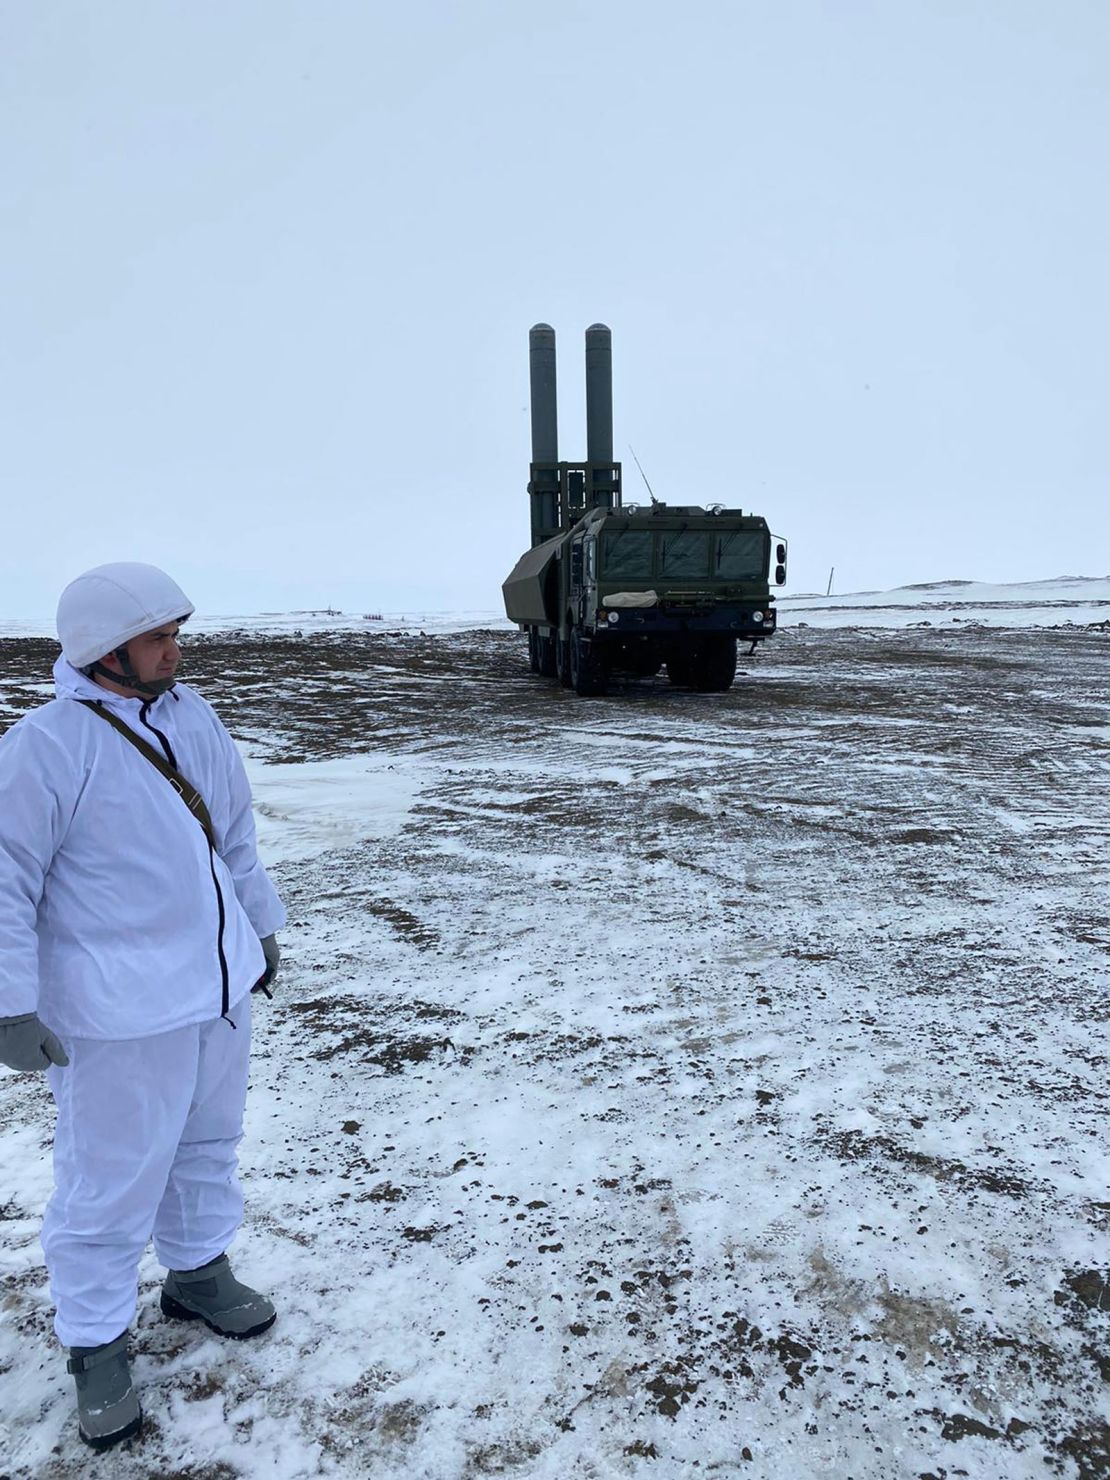 The Russian army paraded to journalists its Bastion coastal defense missile system it has placed on Franz Josef Land, which it says can hit ships or land targets more than 200 miles offshore. 